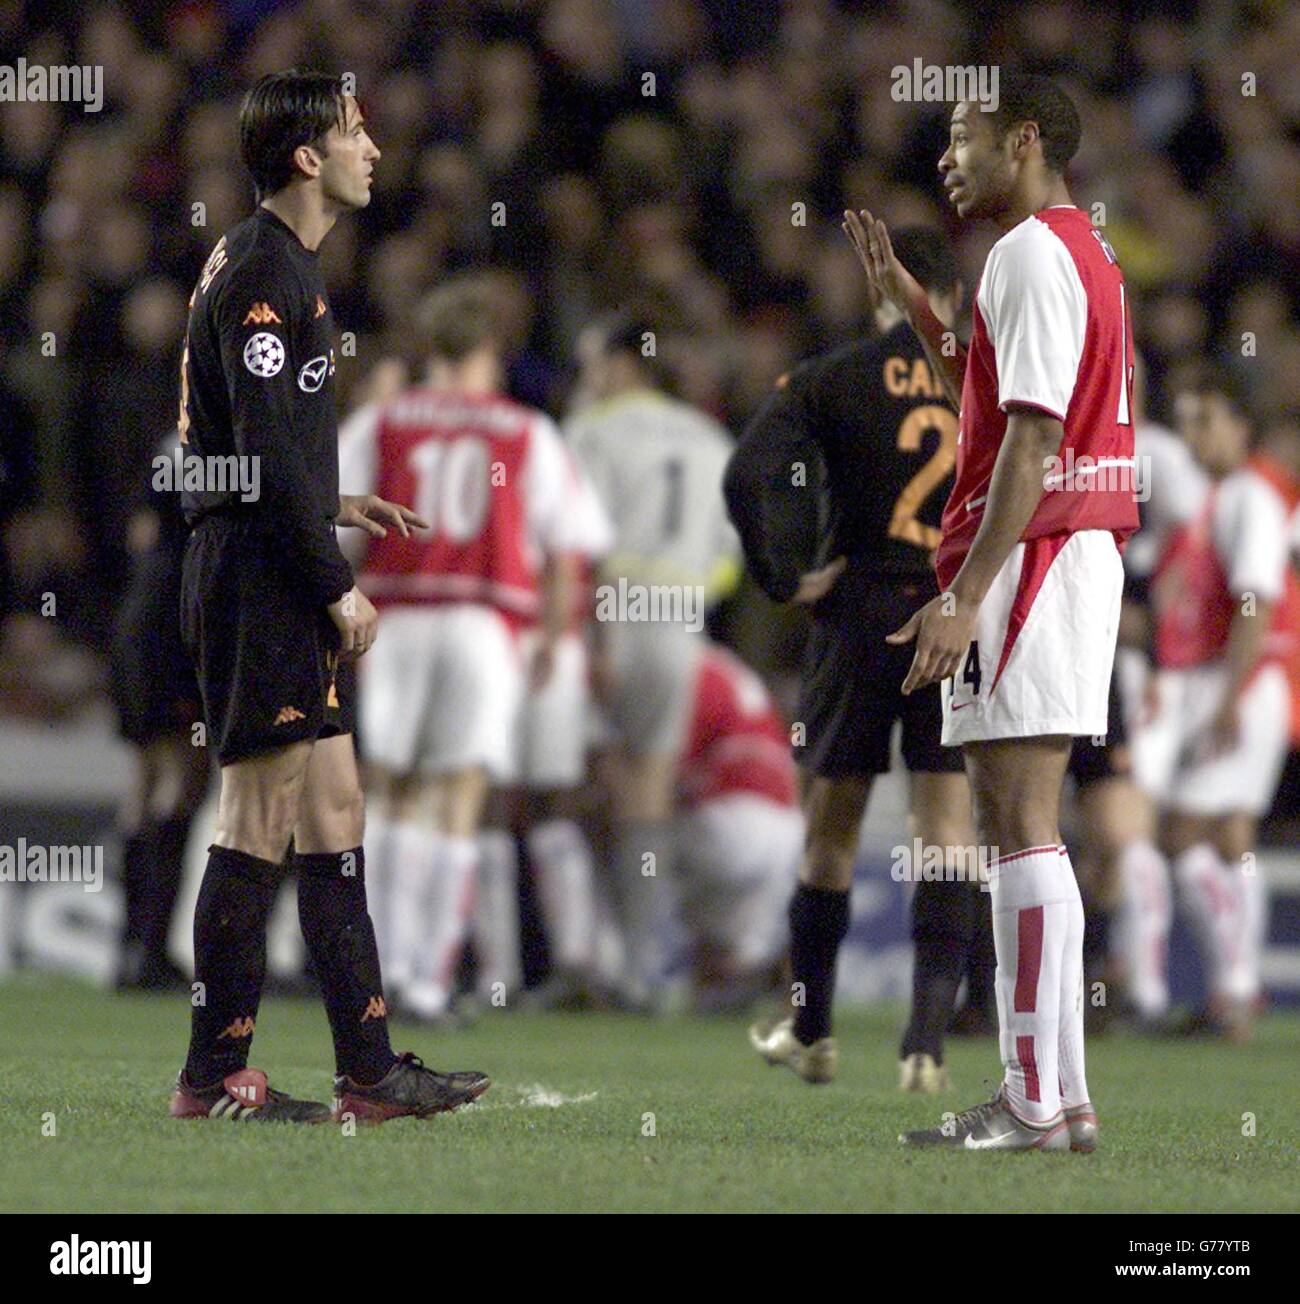 As Roma's Francesco Totti is shown the red card after an incident with Martin Koewn, Roma's Christian Panucci and Arsenal's Thierry Henry exchange opionions of the incident, during their Champions League 2nd Round Group A match at Highbury in North London. Stock Photo